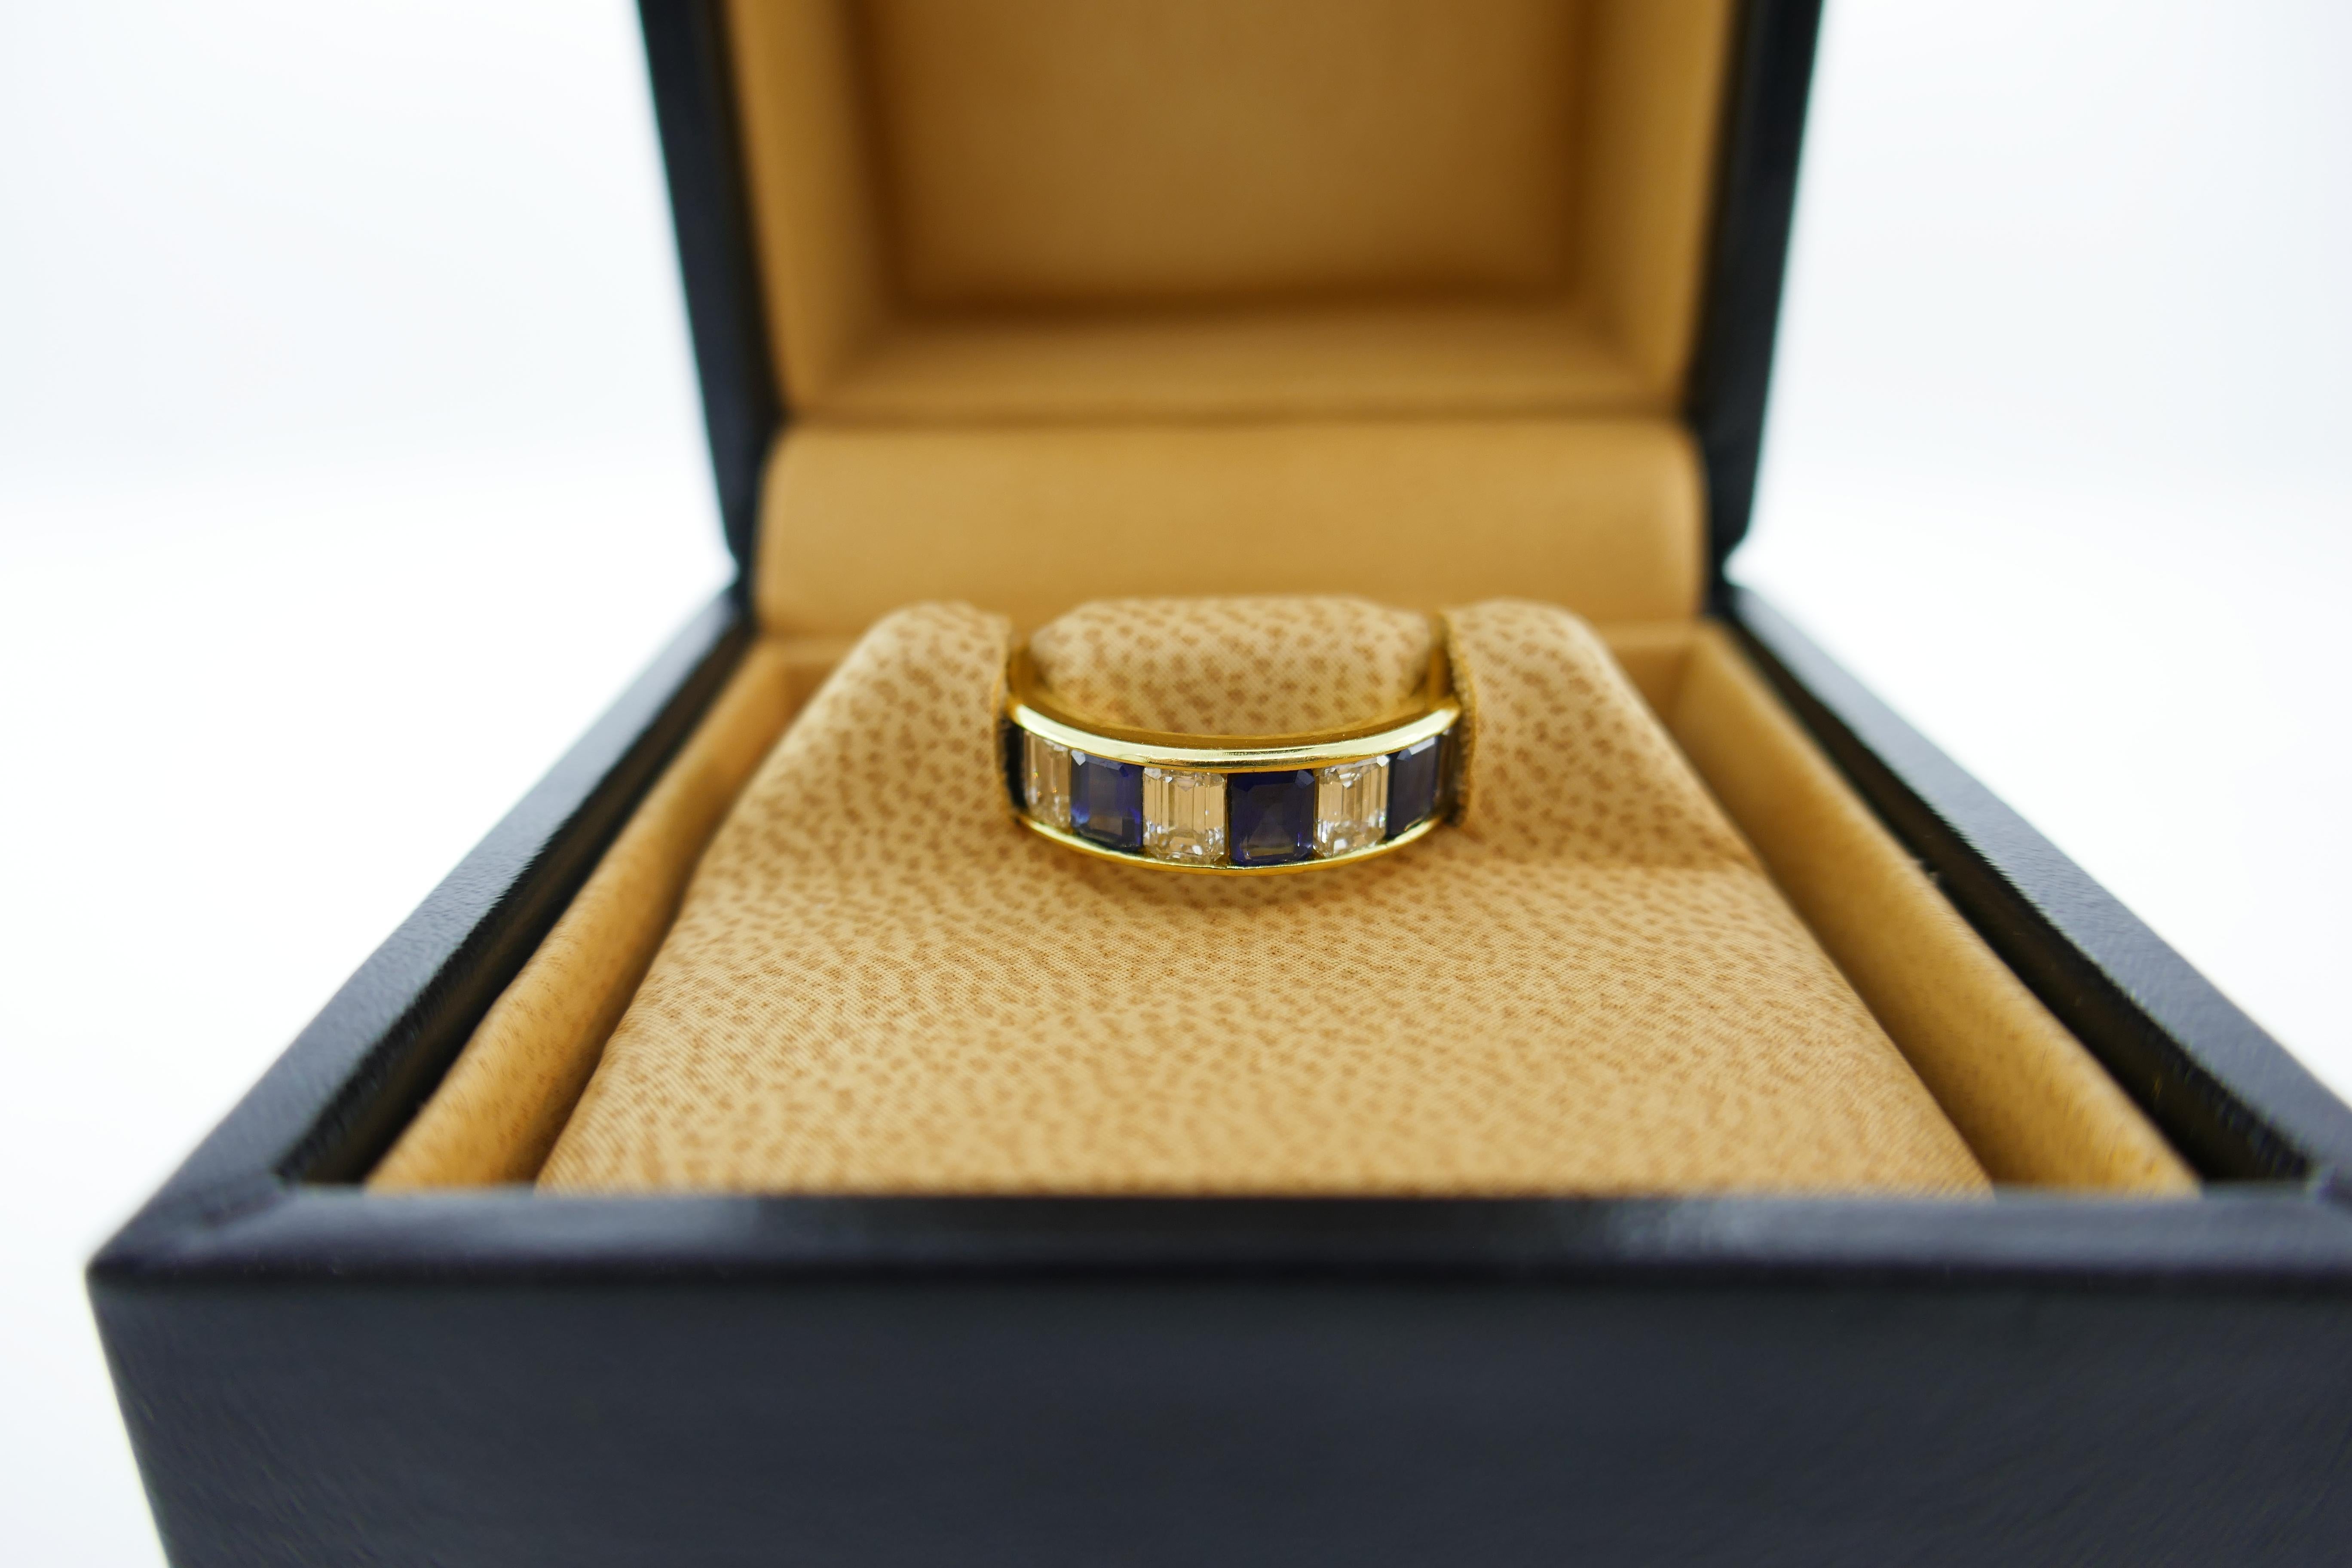 Bvlgari Sapphire and Diamond Band

This is a stunning Bvlgari sapphire and diamond band. It features 18k yellow gold, 2.25 carats of  excellent quality sapphires and roughly 2.5 carats of lively emerald cut diamonds. 

Size: 5 (US) 

Weight: 5.5